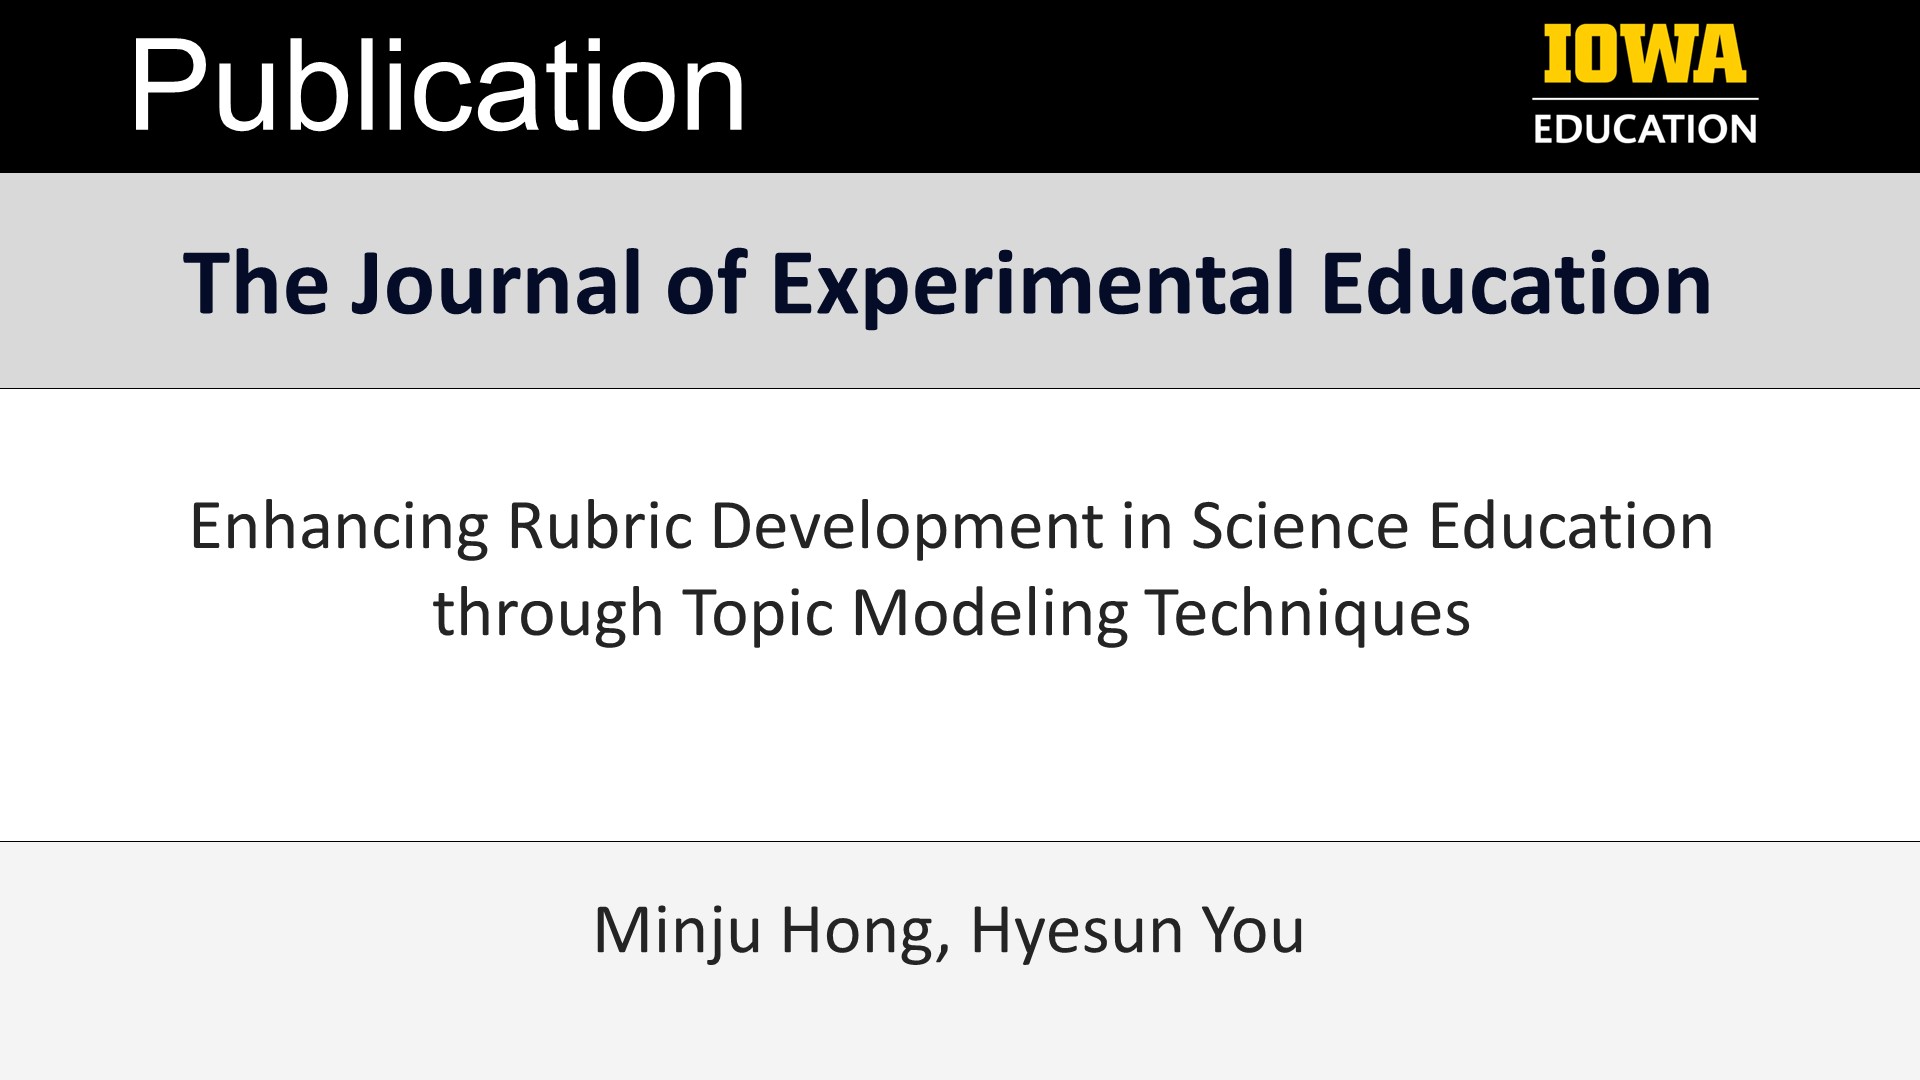 Publication: Enhancing Rubric Development in Science Education through Topic Modeling Techniques. The Journal of Experimental Education